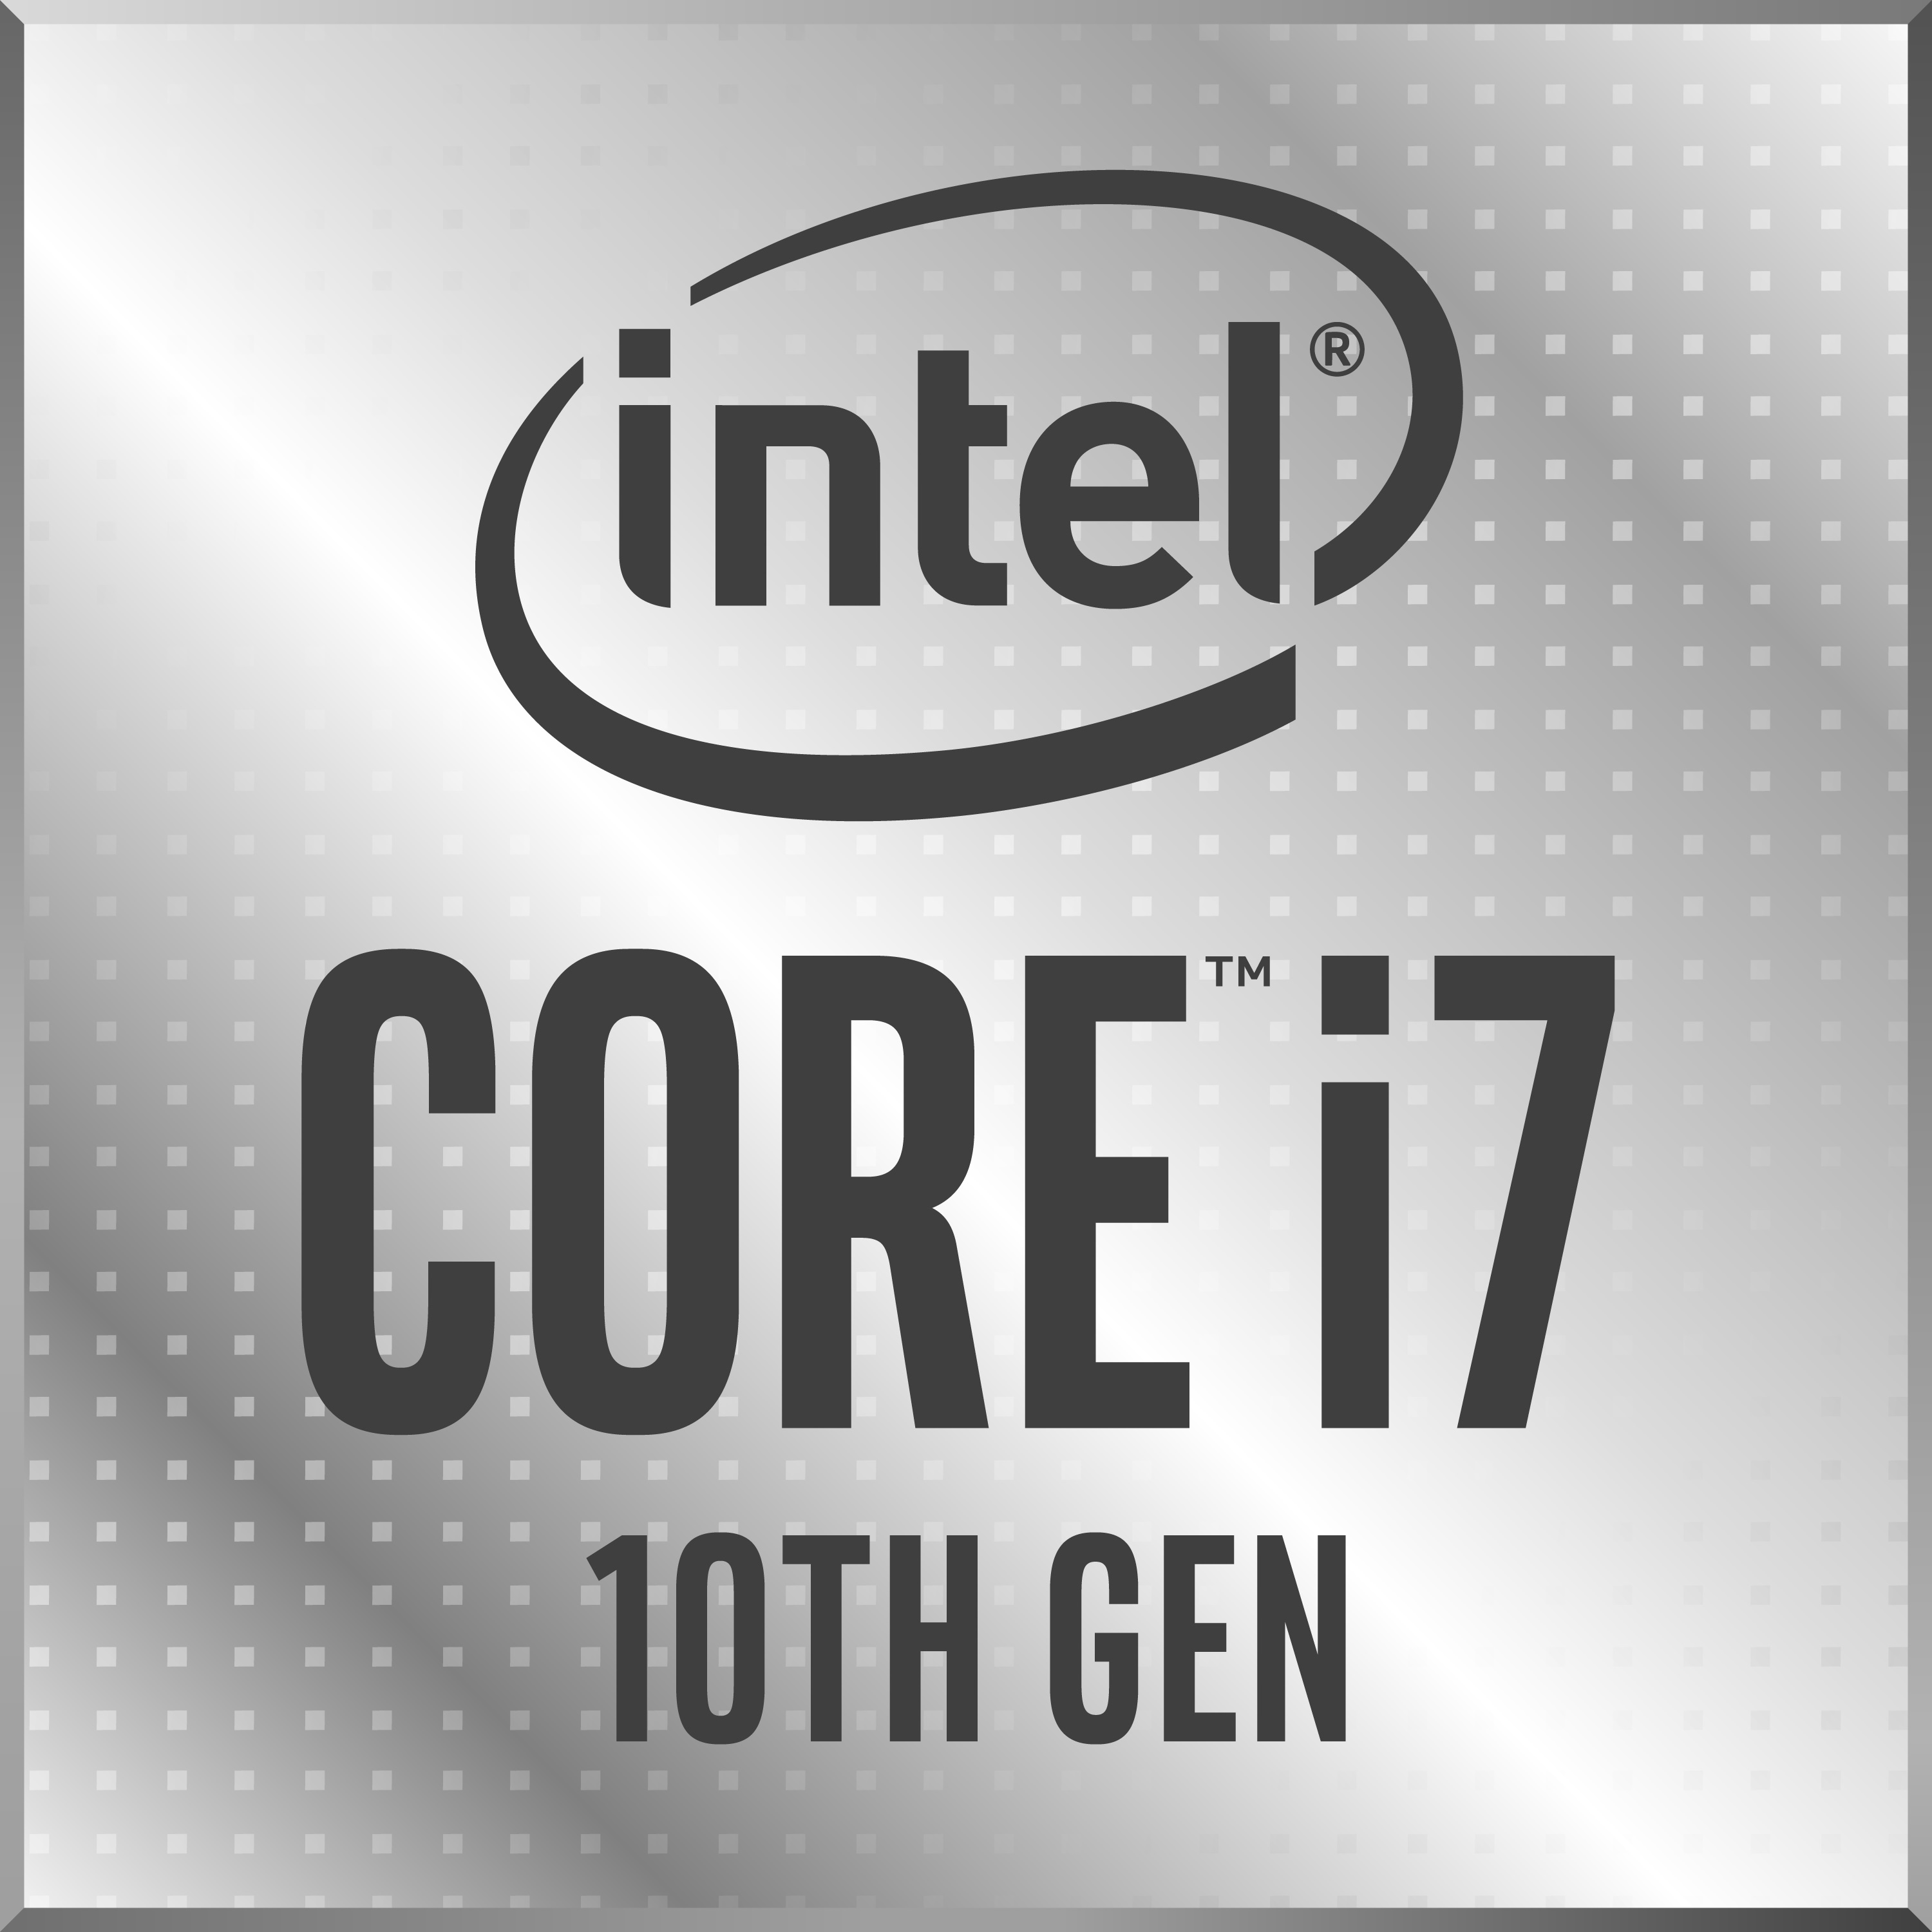 Intel Core i7-10750H Processor - Benchmarks and Specs -   Tech